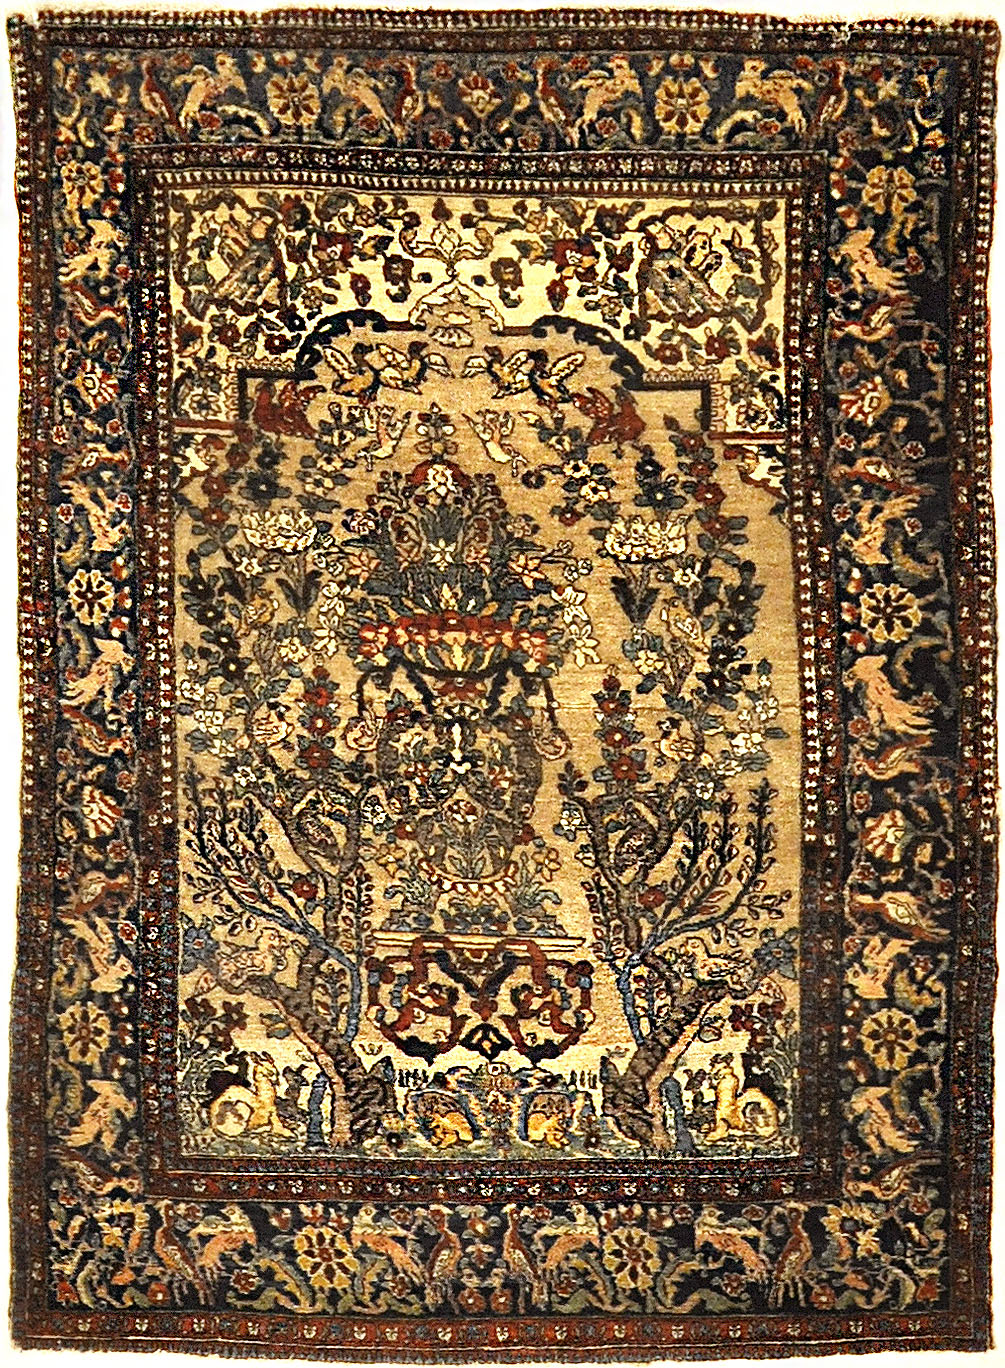 Very Rare and Unusual Antique Bakhtiari Rug. A piece of genuine authentic antique woven carpet art sold by Santa Barbara Design Center Rugs and More.